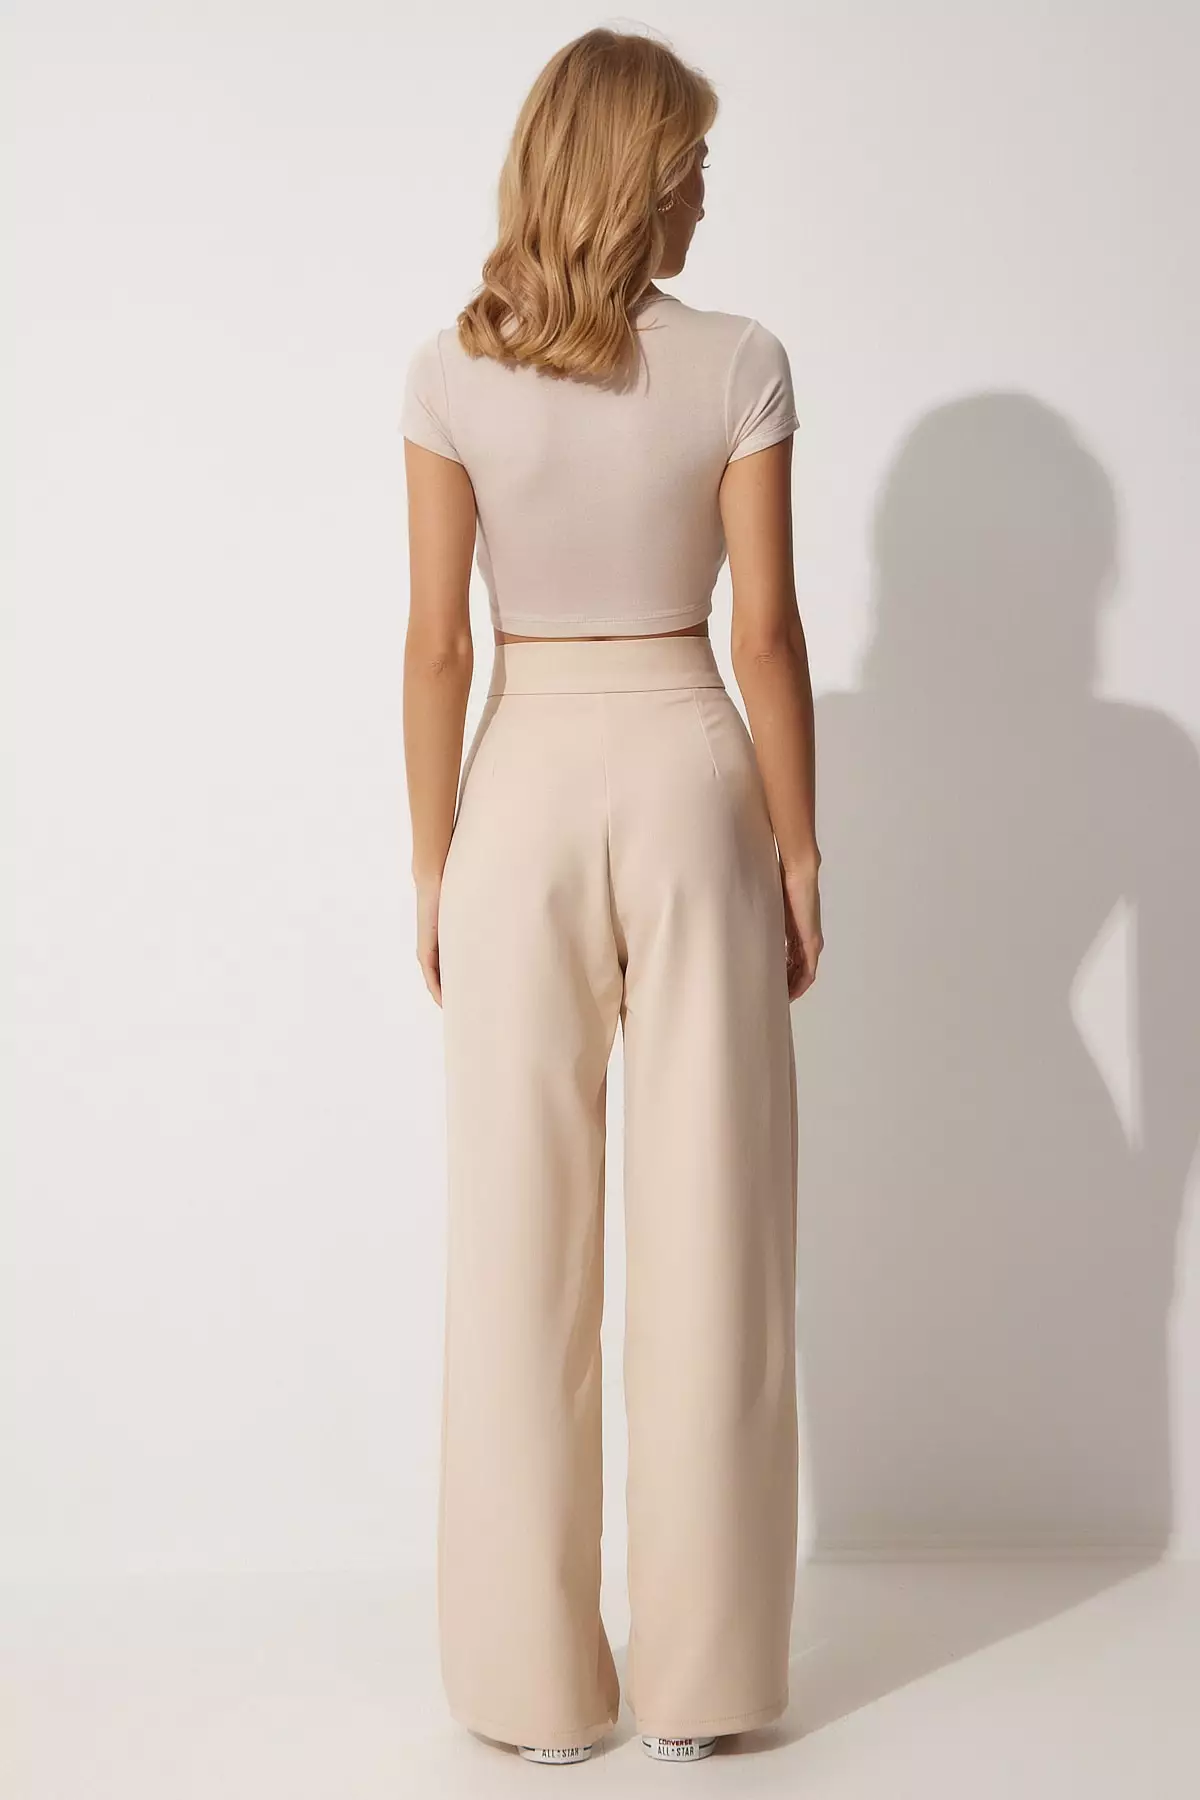 Buy Happiness Istanbul High Waist Pleated Pants in Beige 2024